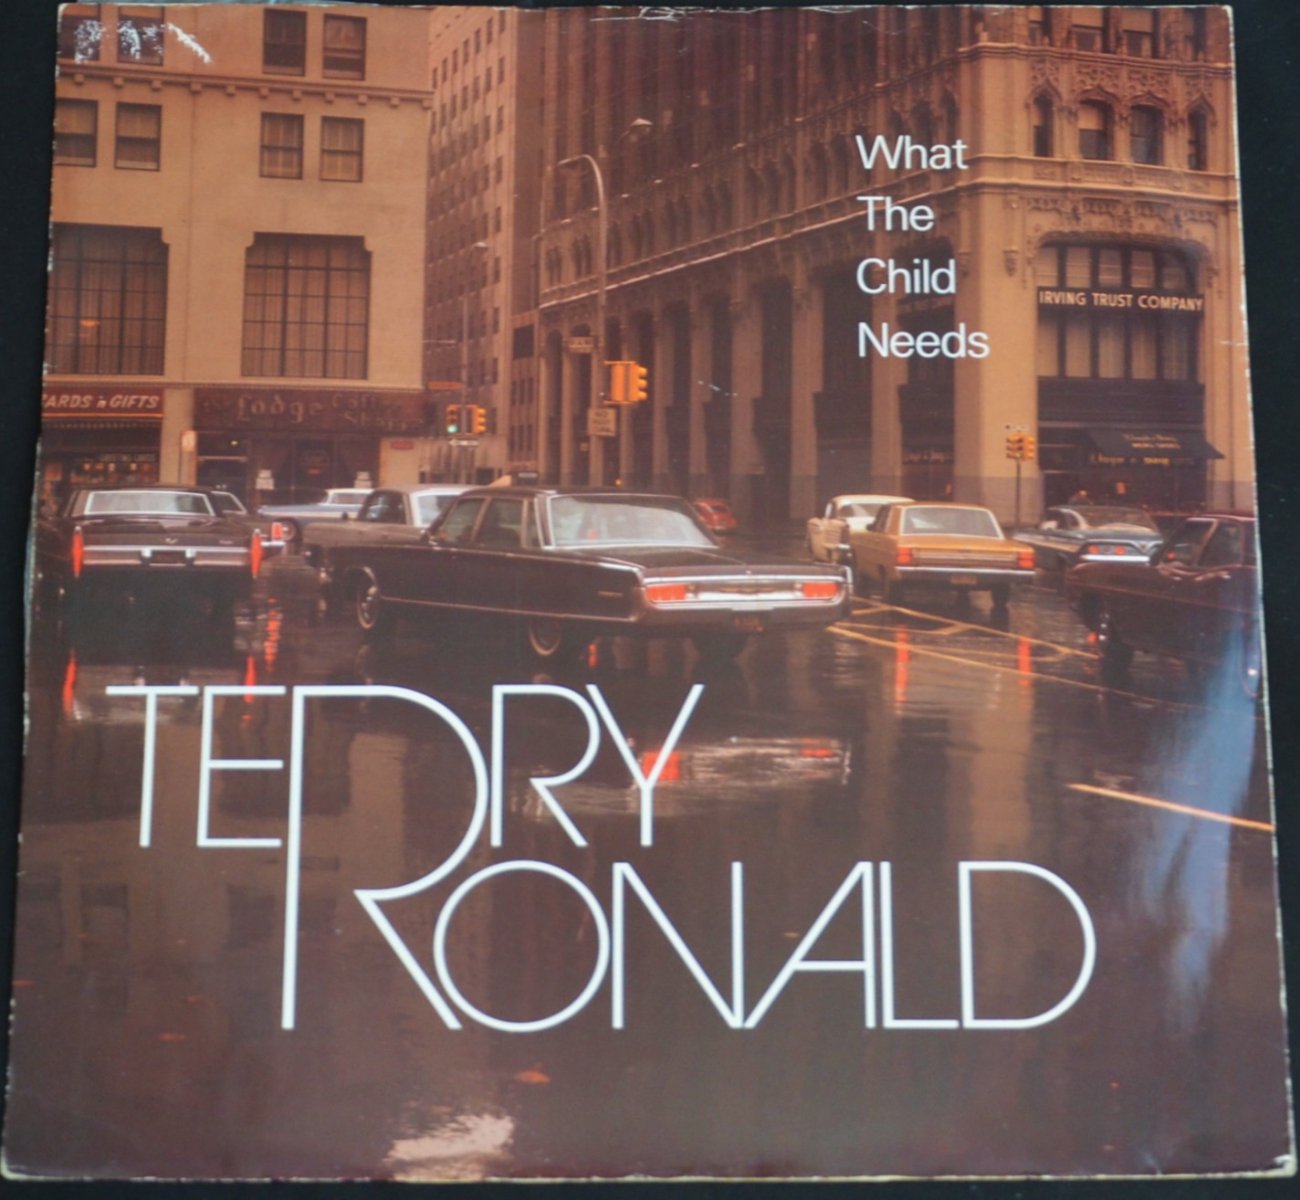 TERRY RONALD / WHAT THE CHILD NEEDS (12